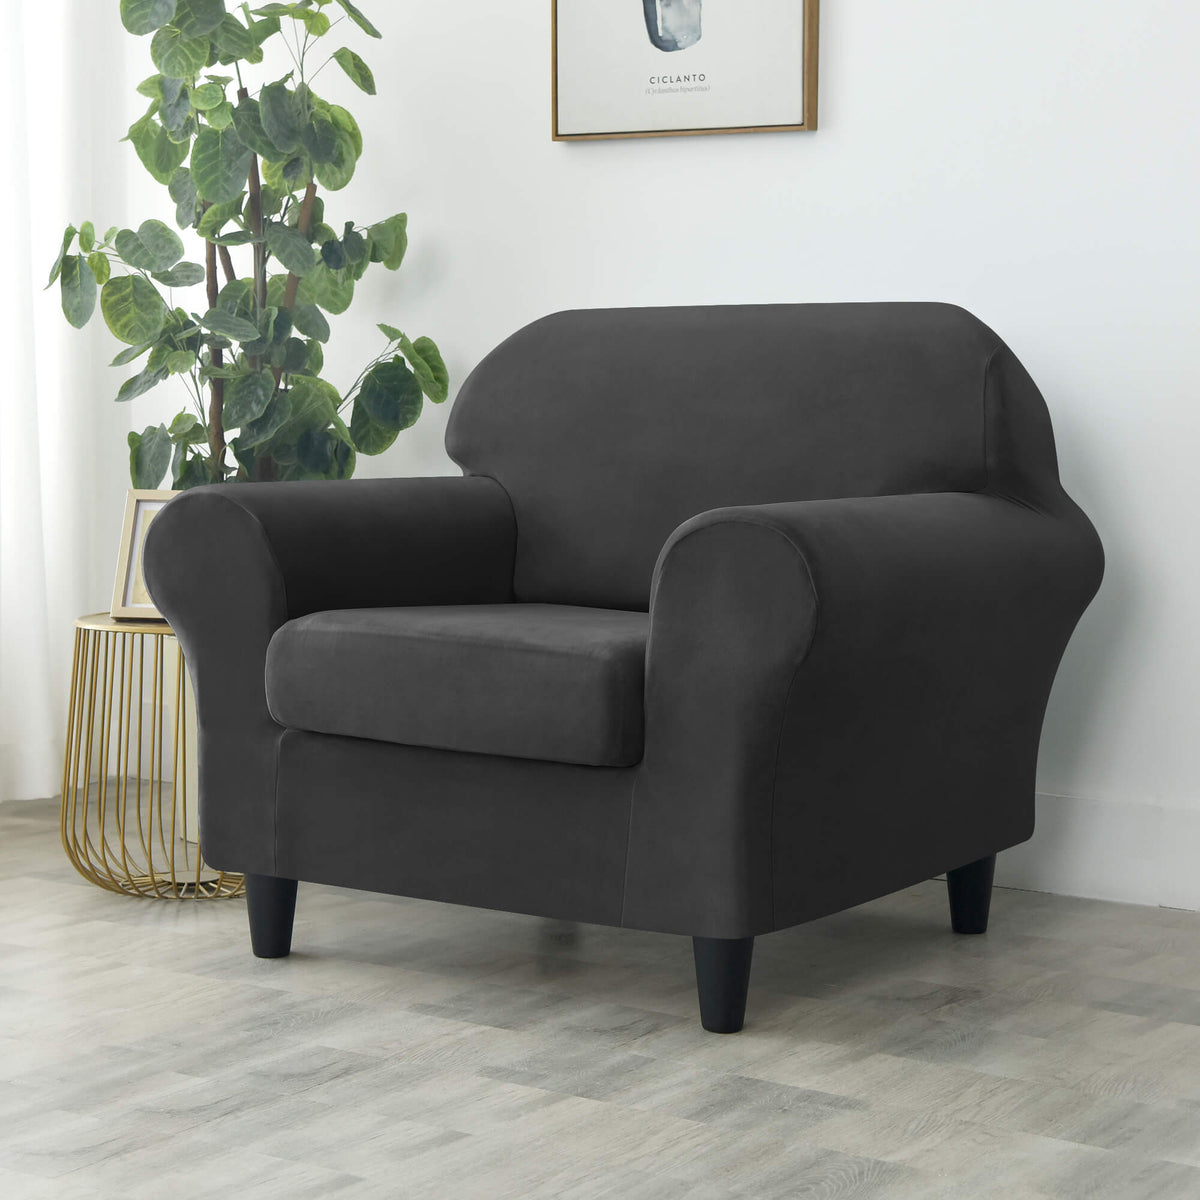 Crfatop Modern Couch Cover Stretch Armchair Sofa Seat Slipcovers with Elastic Bottom ArmchairBlack